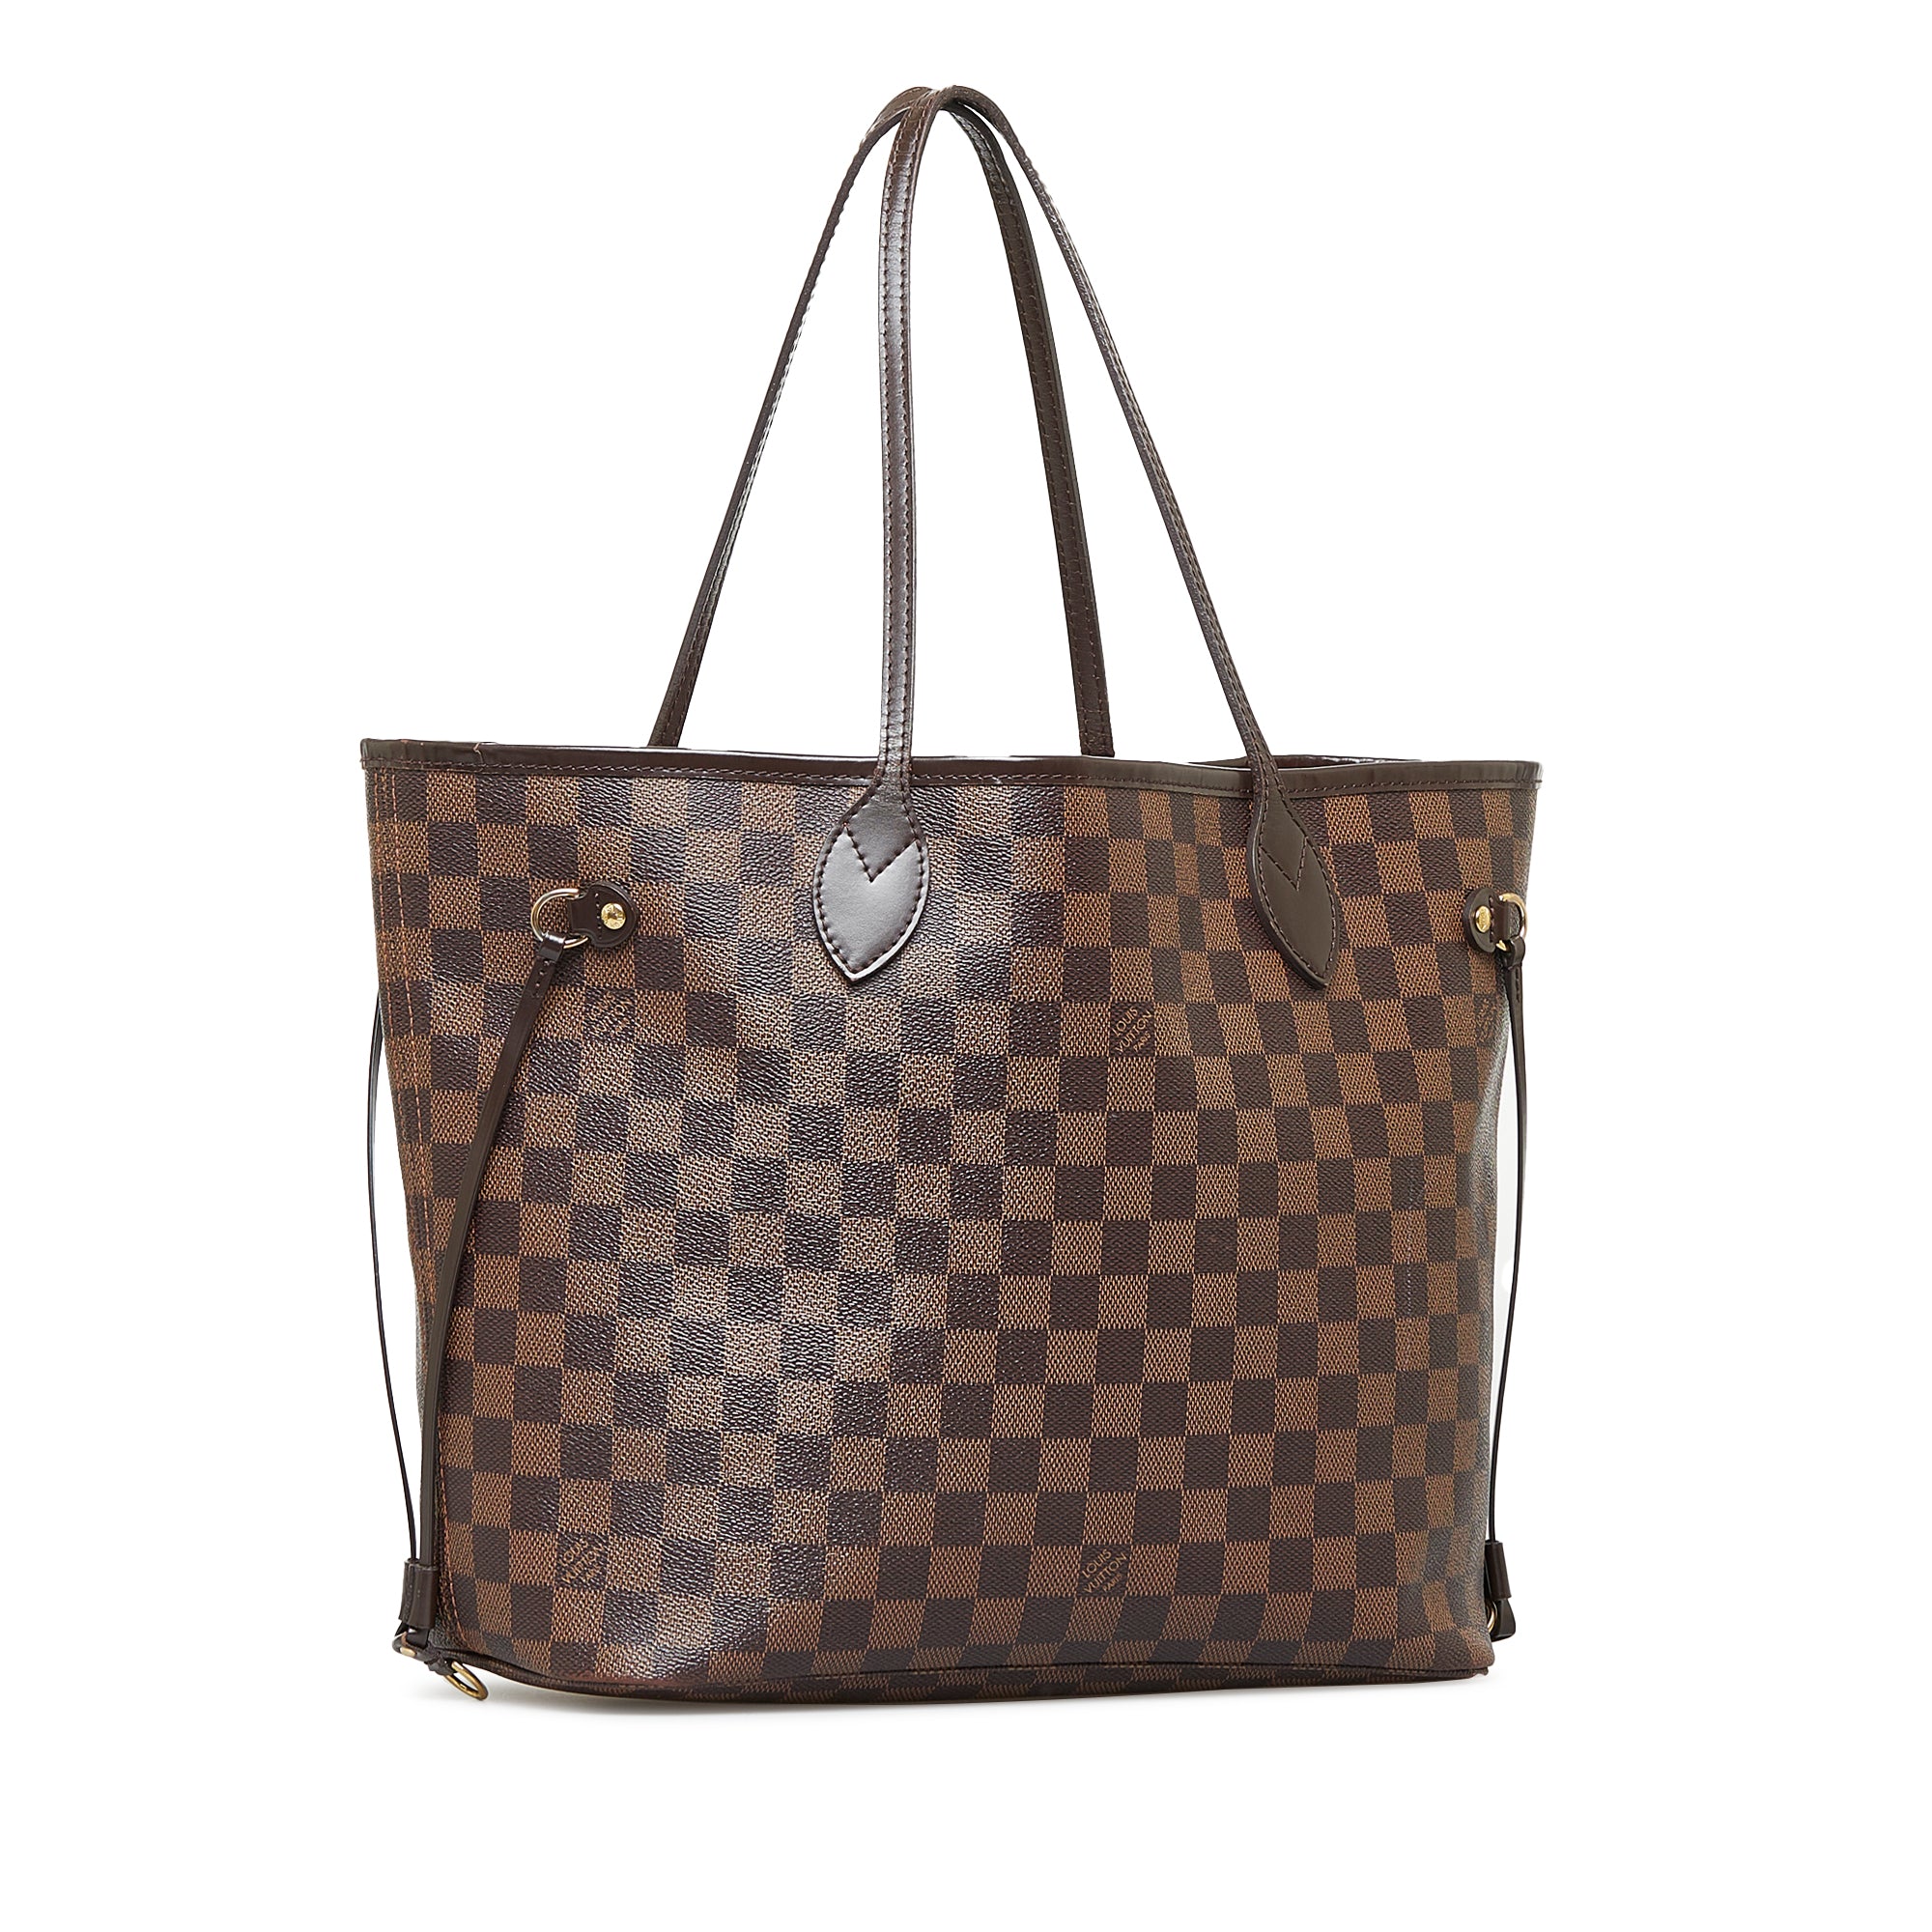 Authenticated Used LOUIS VUITTON Shoulder Bag Epi Neverfull PM